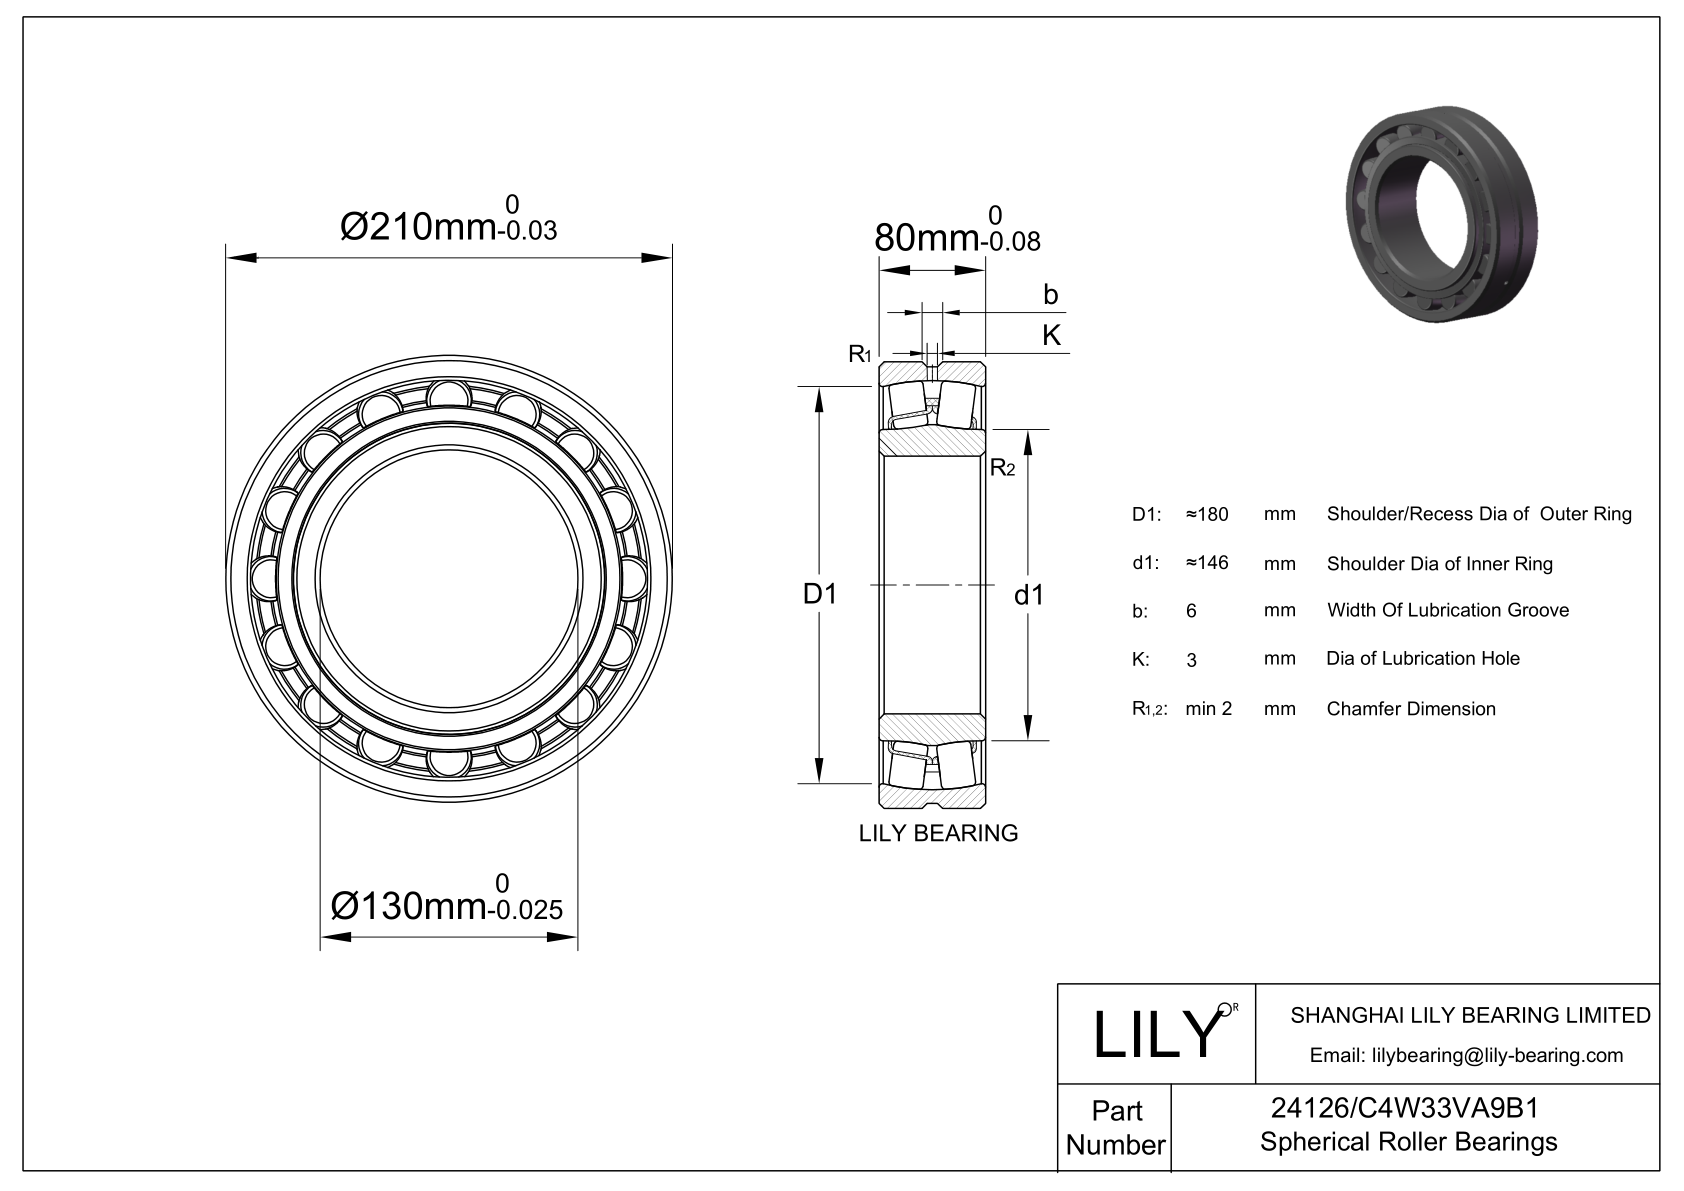 24126/C4W33VA9B1 Double Row Spherical Roller Bearing cad drawing